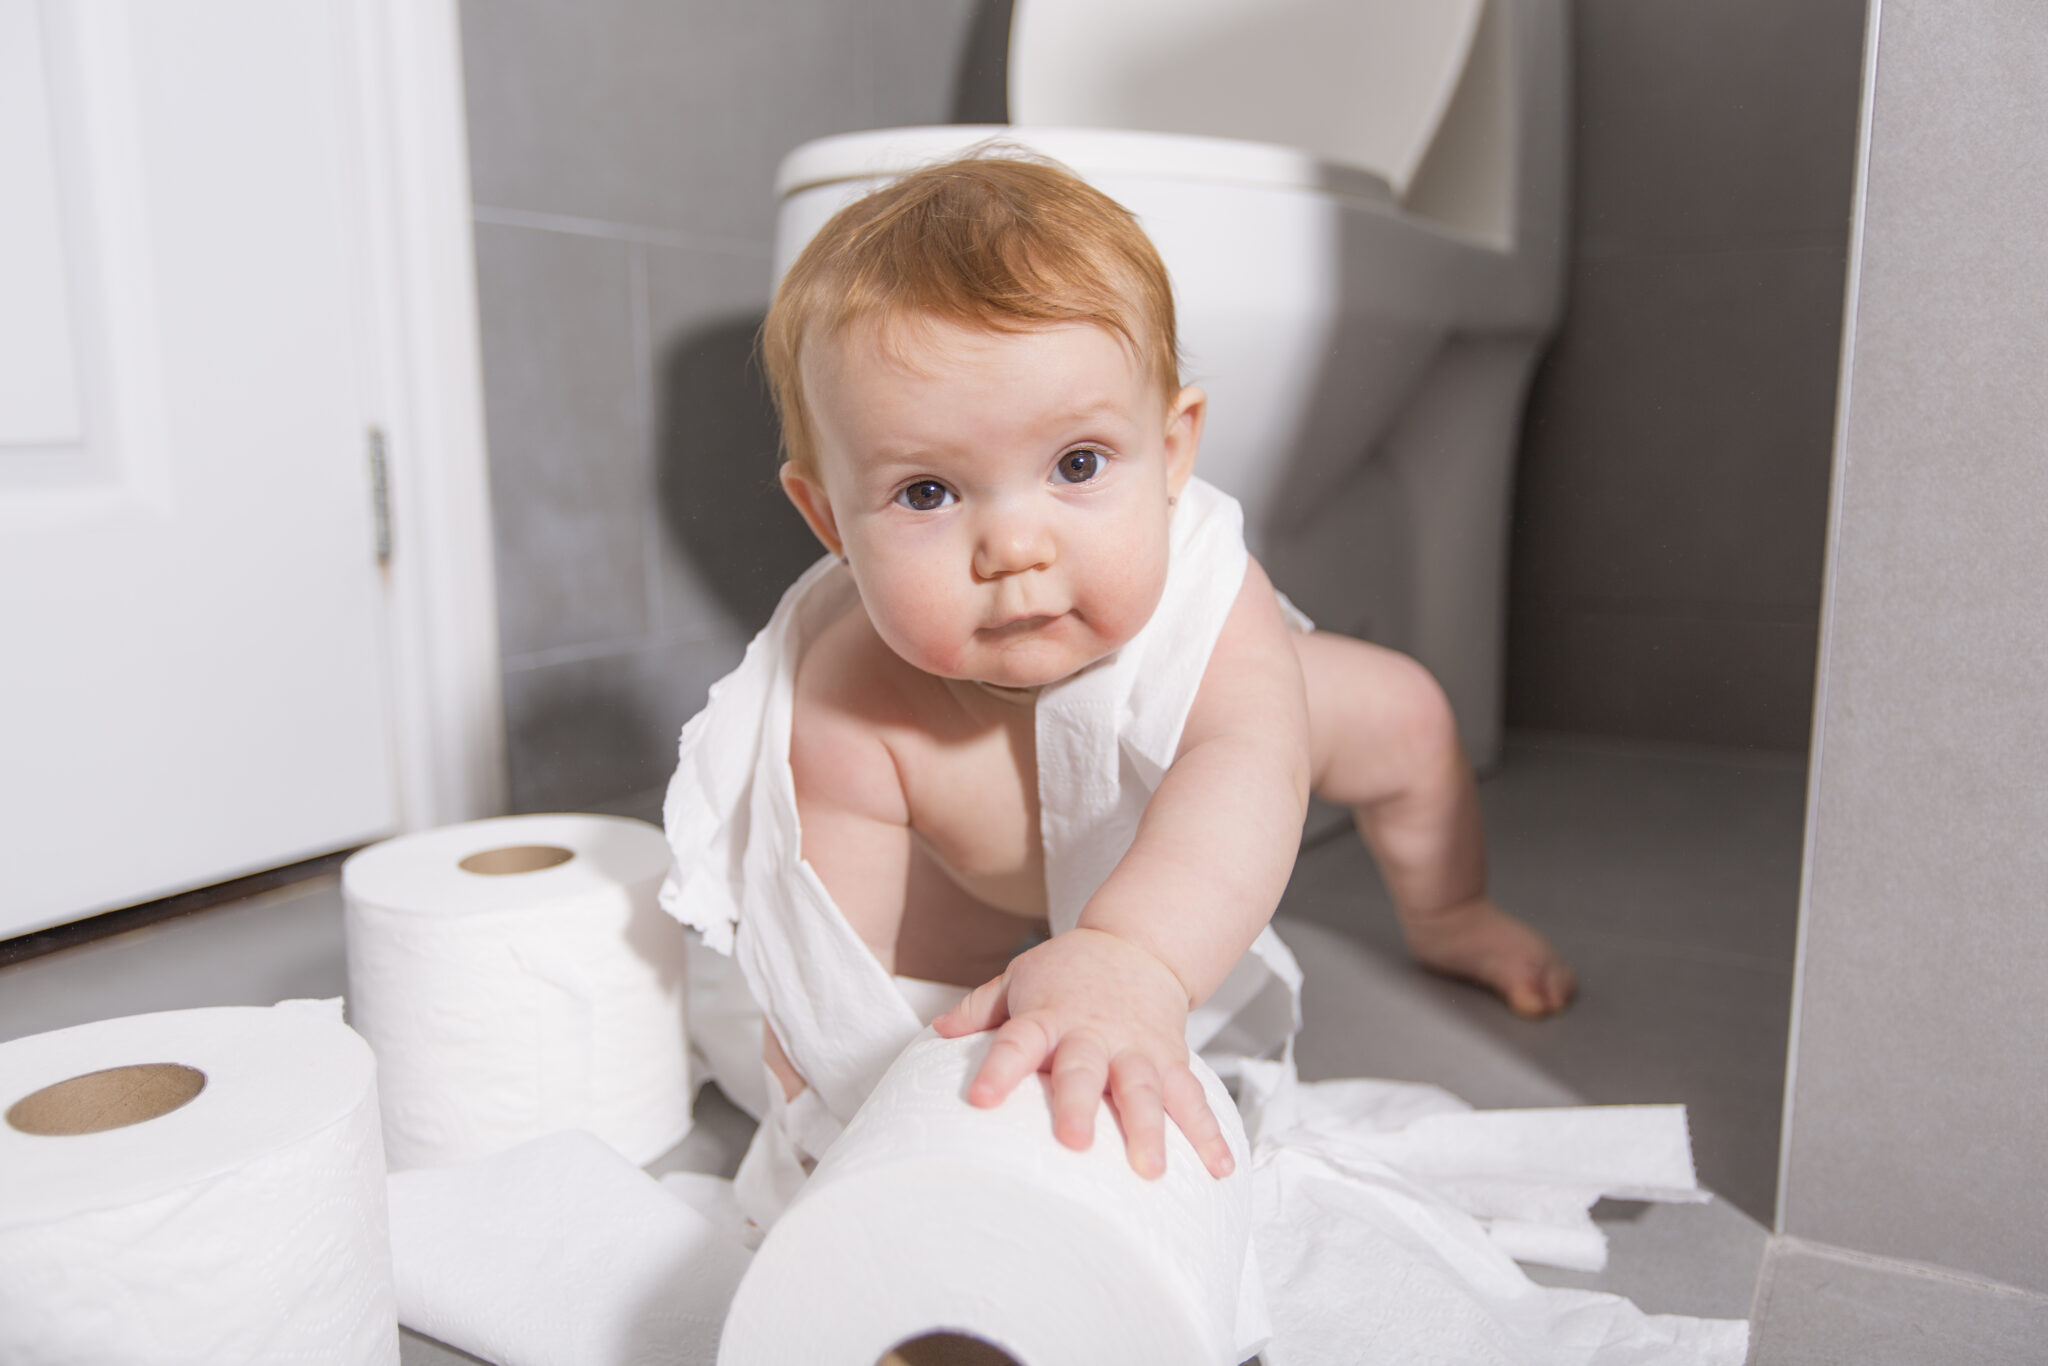 Which Is the Best Value Toilet Paper? - Smart Family Money